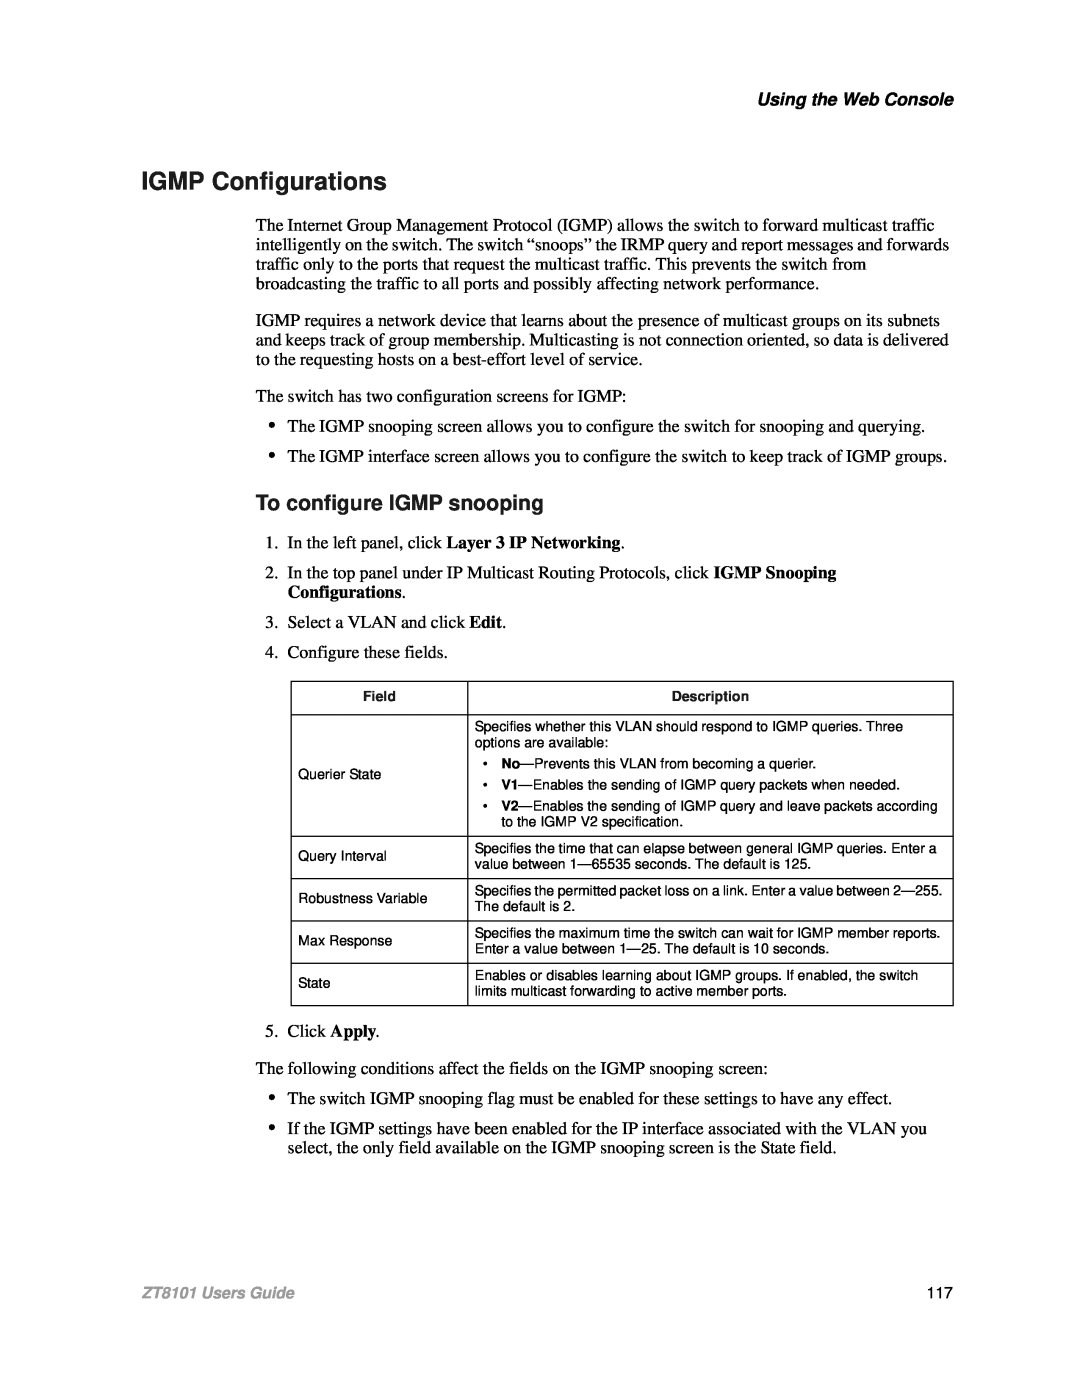 Intel ZT8101 user manual IGMP Configurations, To configure IGMP snooping, Using the Web Console 